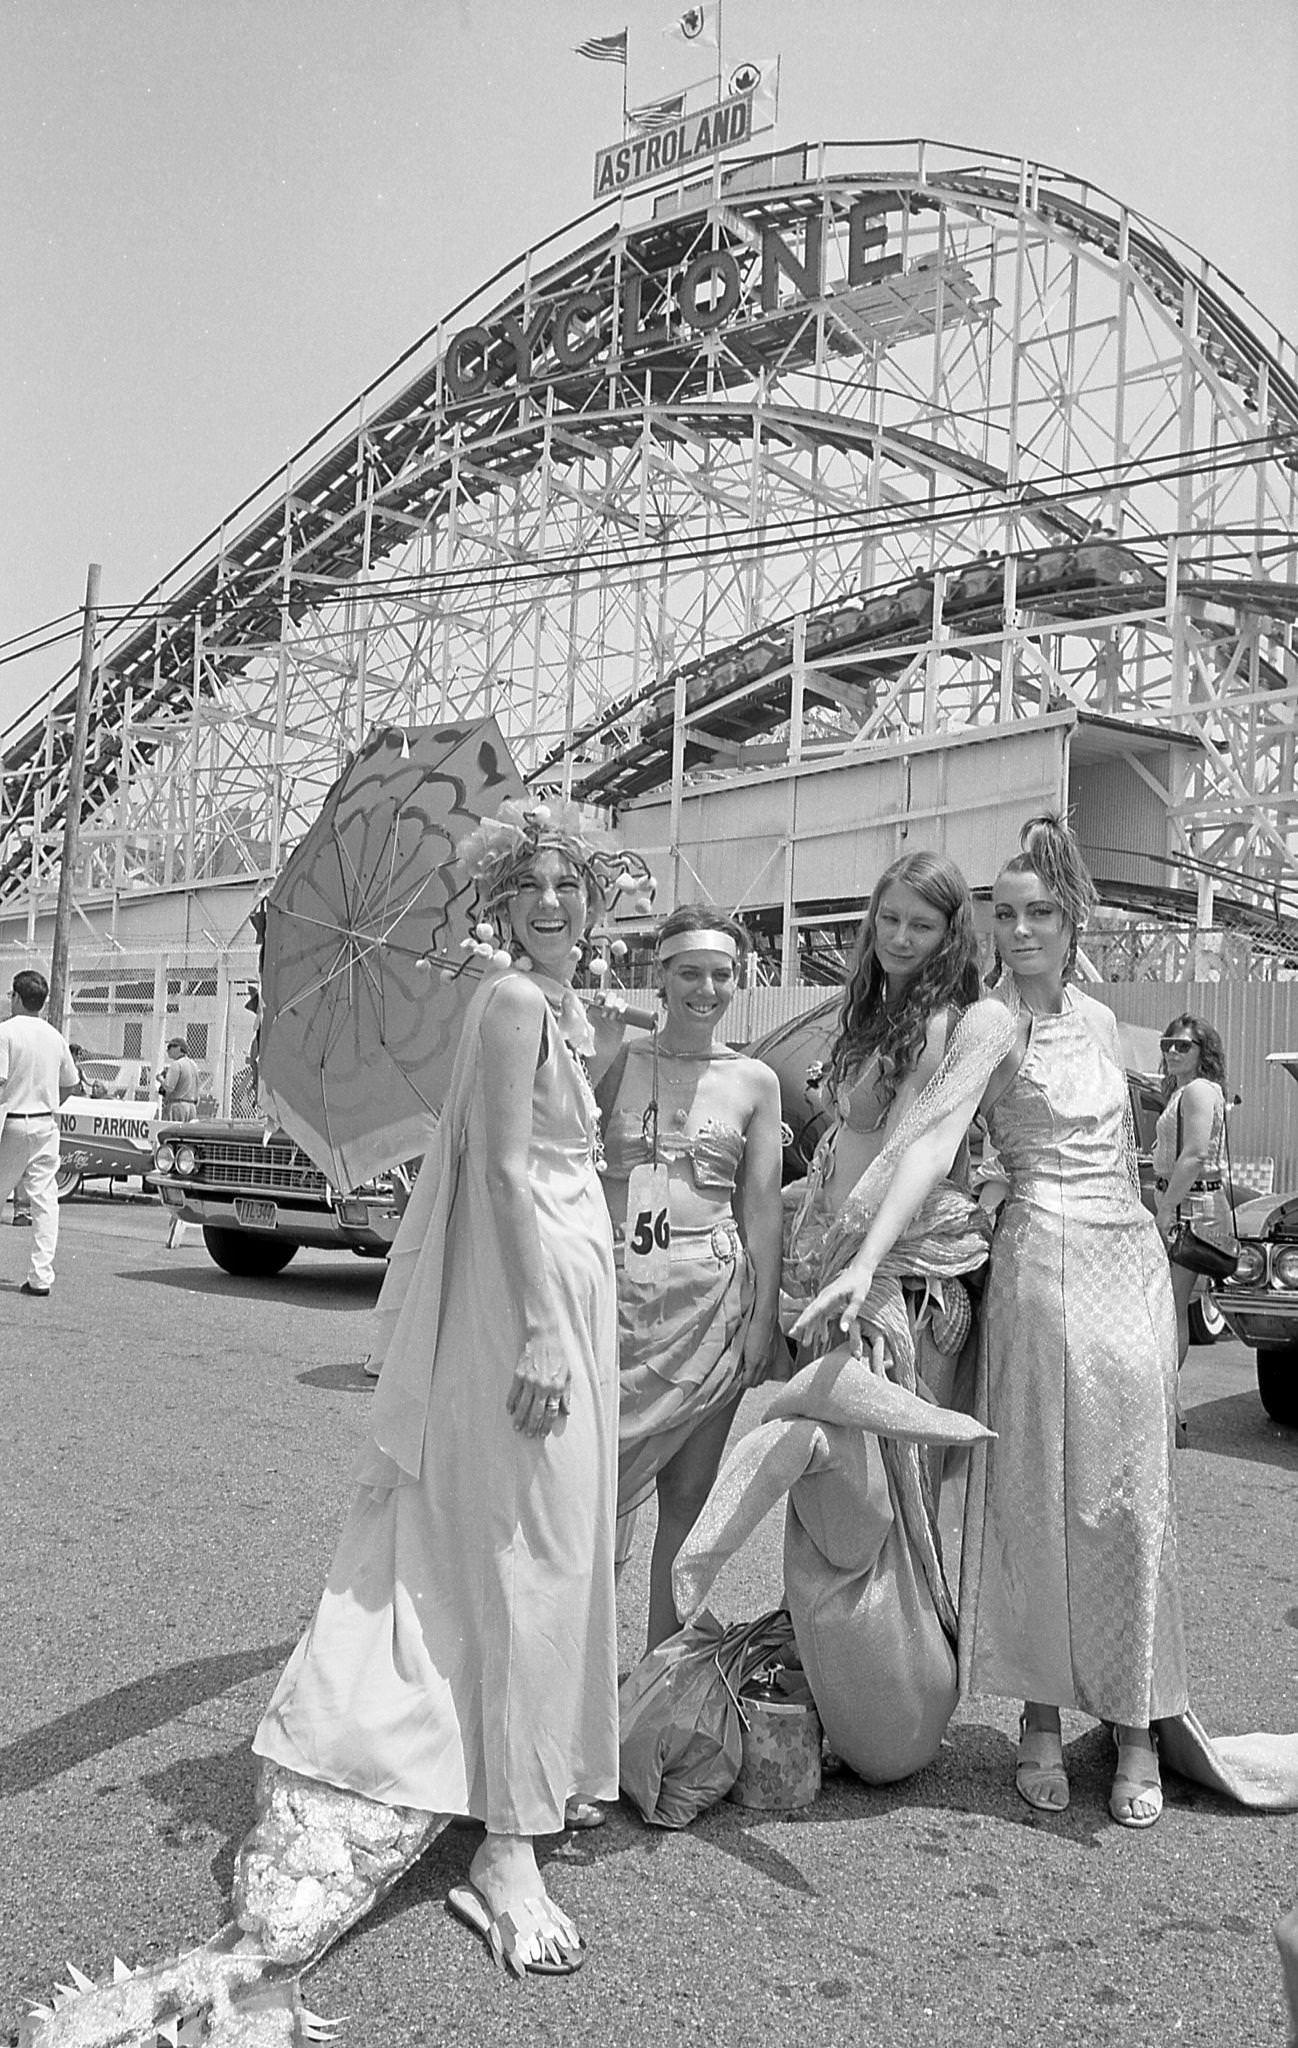 Women Pose In Front Of Cyclone Roller Coaster At Coney Island Mermaid Parade, 1997